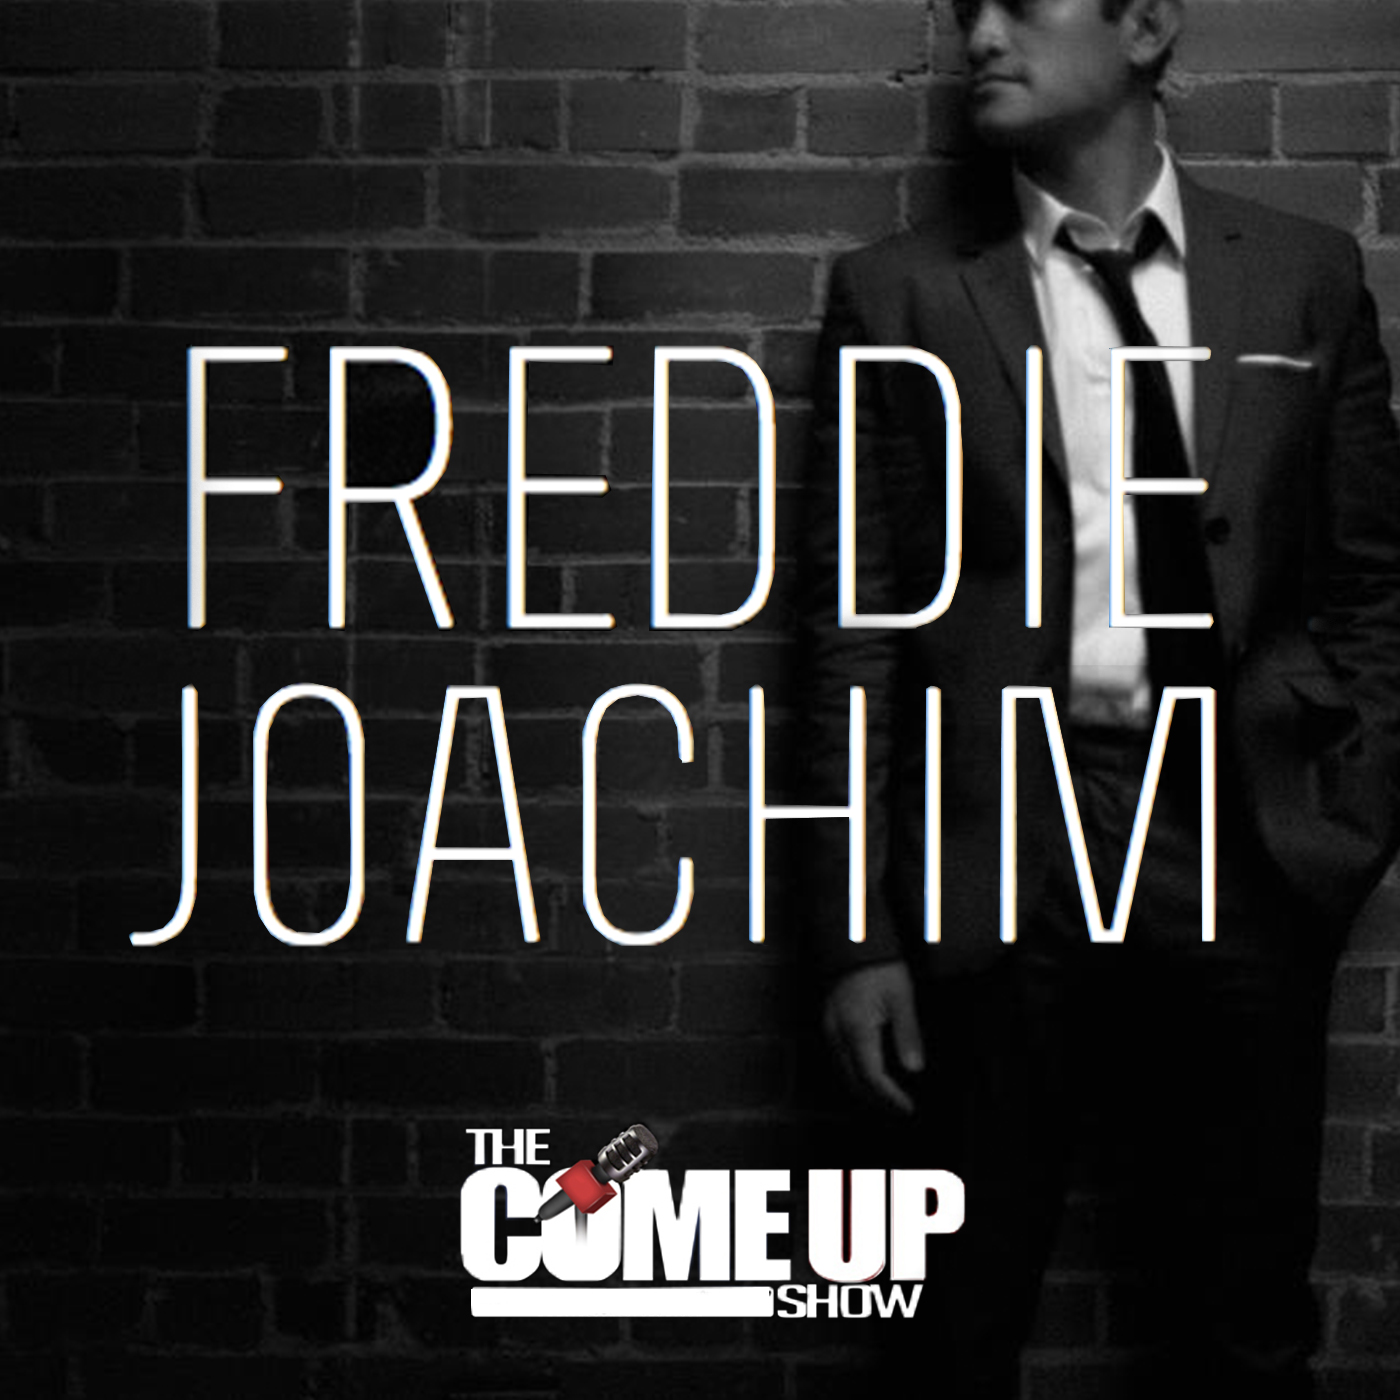 Thumbnail for "Freddie Joachim talks digging for records, keys to happiness, and advice for new artists".